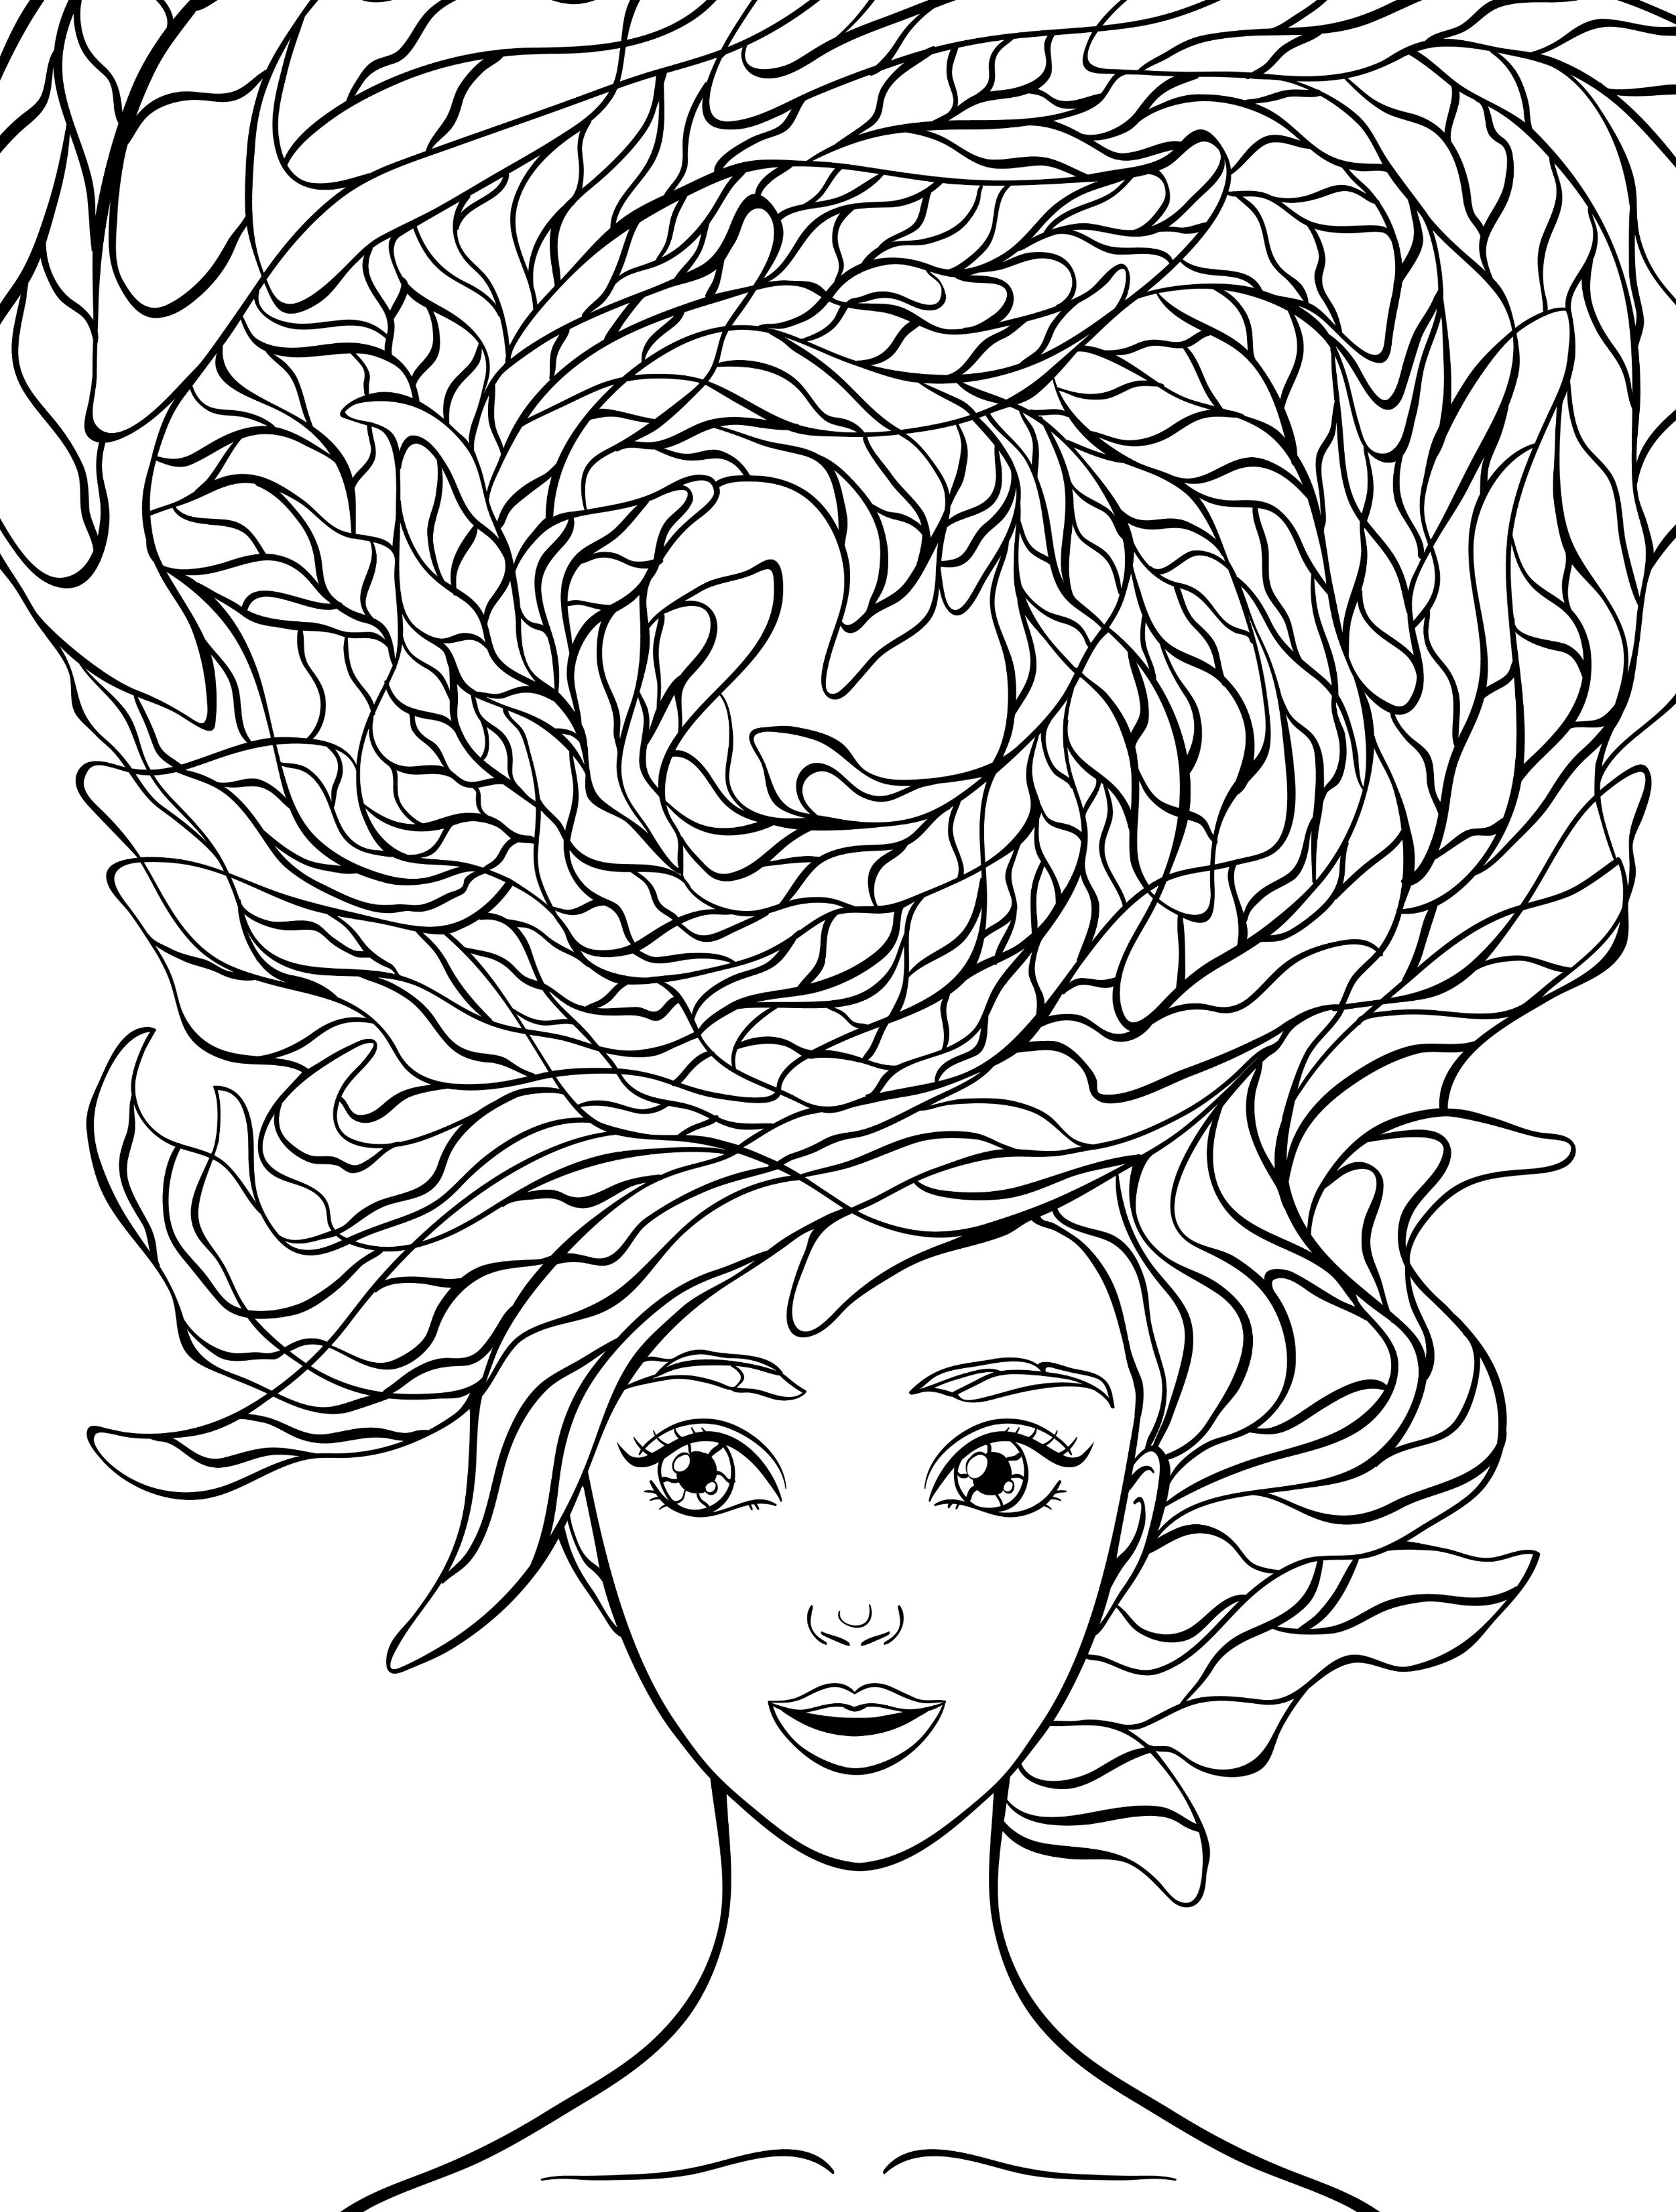 Hair Coloring Book
 10 Crazy Hair Adult Coloring Pages Page 2 of 12 Nerdy